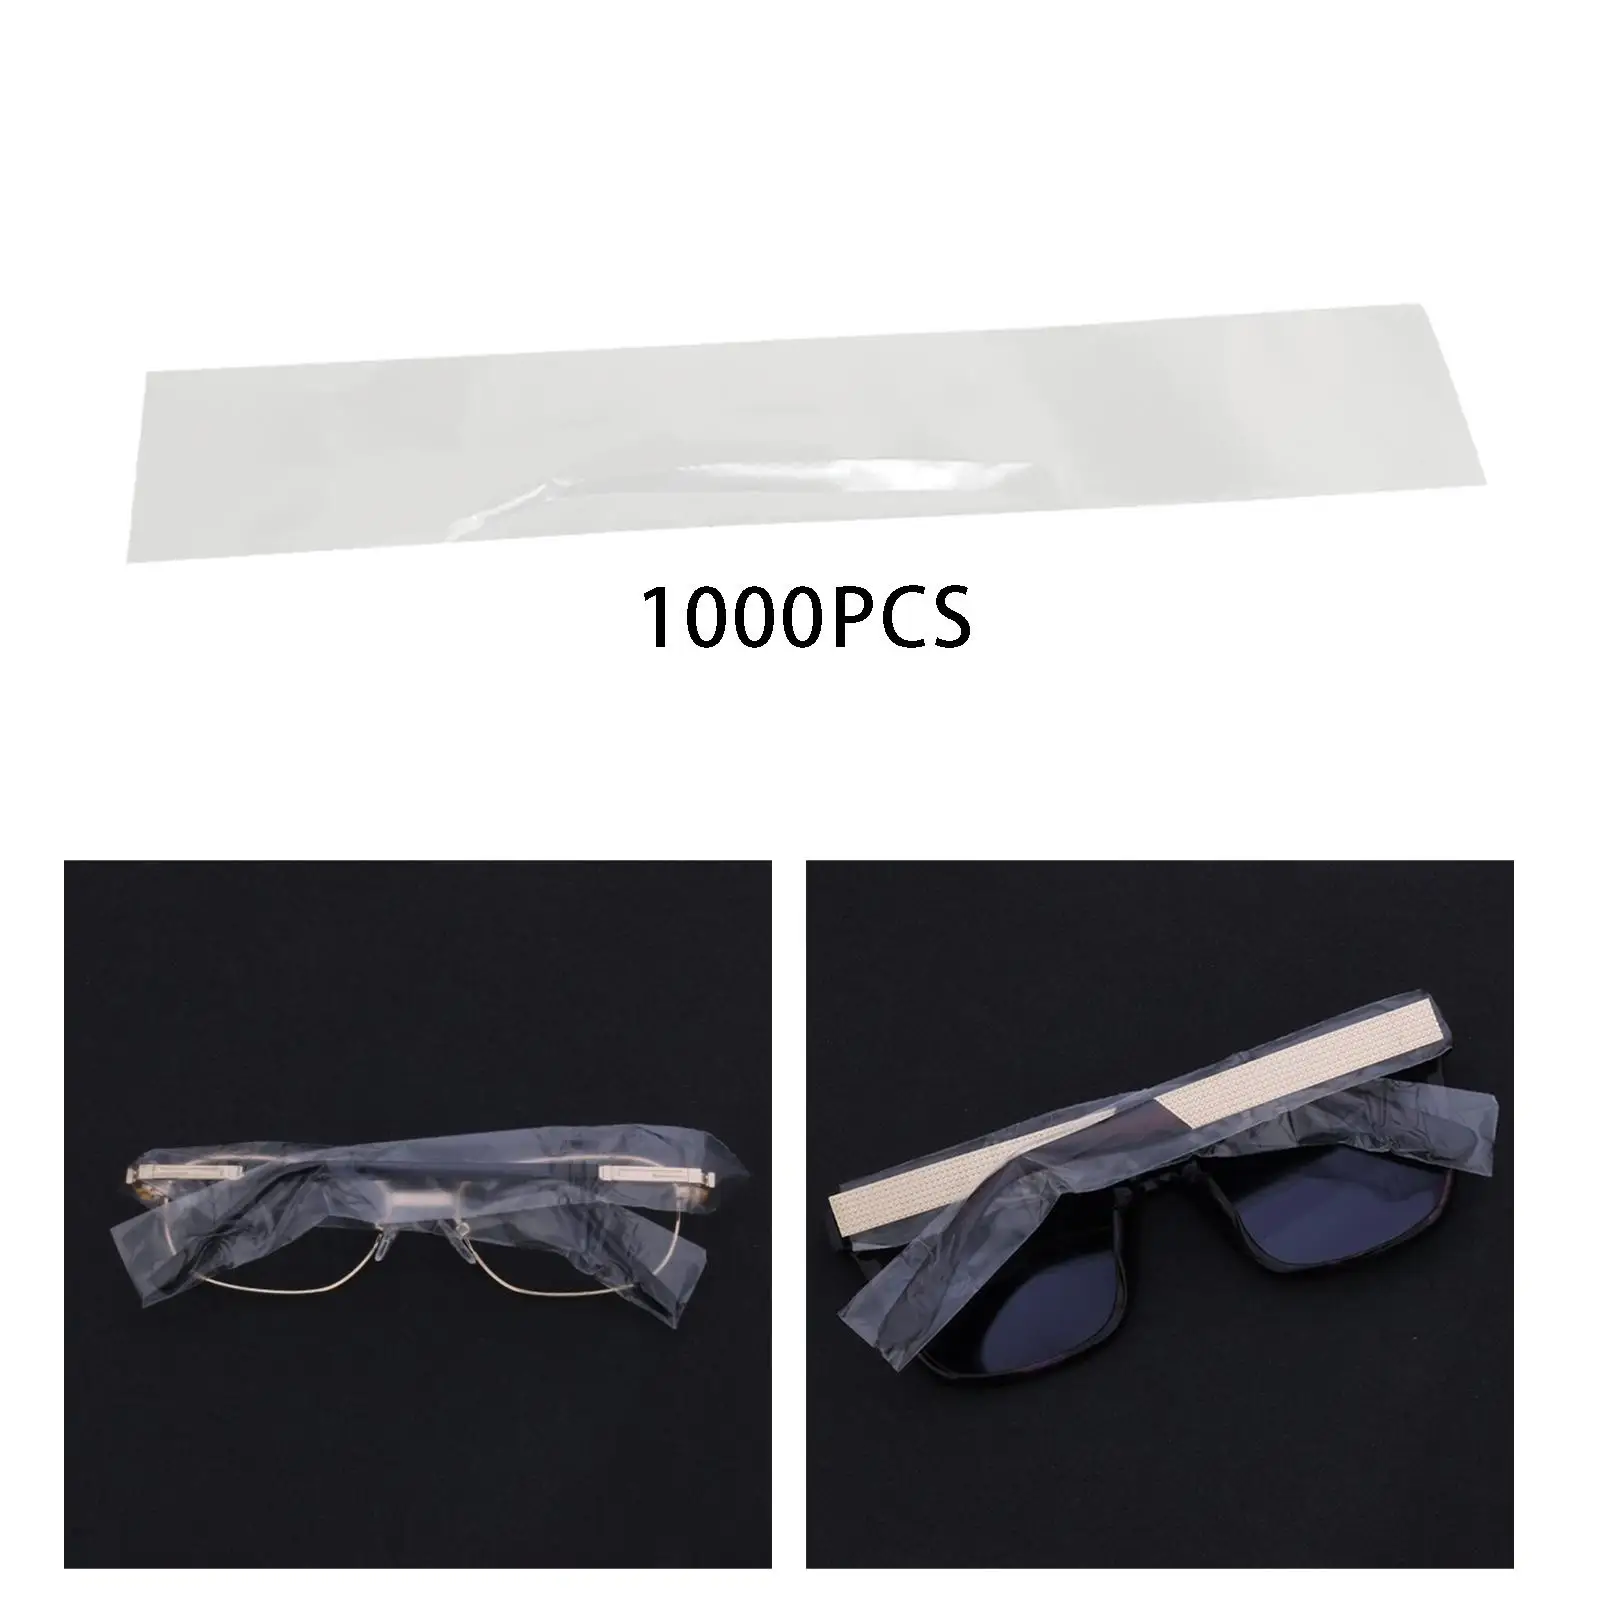 1000 Pieces Eyeglass Temple Sleeves Disposable Eyeglass Leg Sleeves Cover for Hair Dyeing Coloring